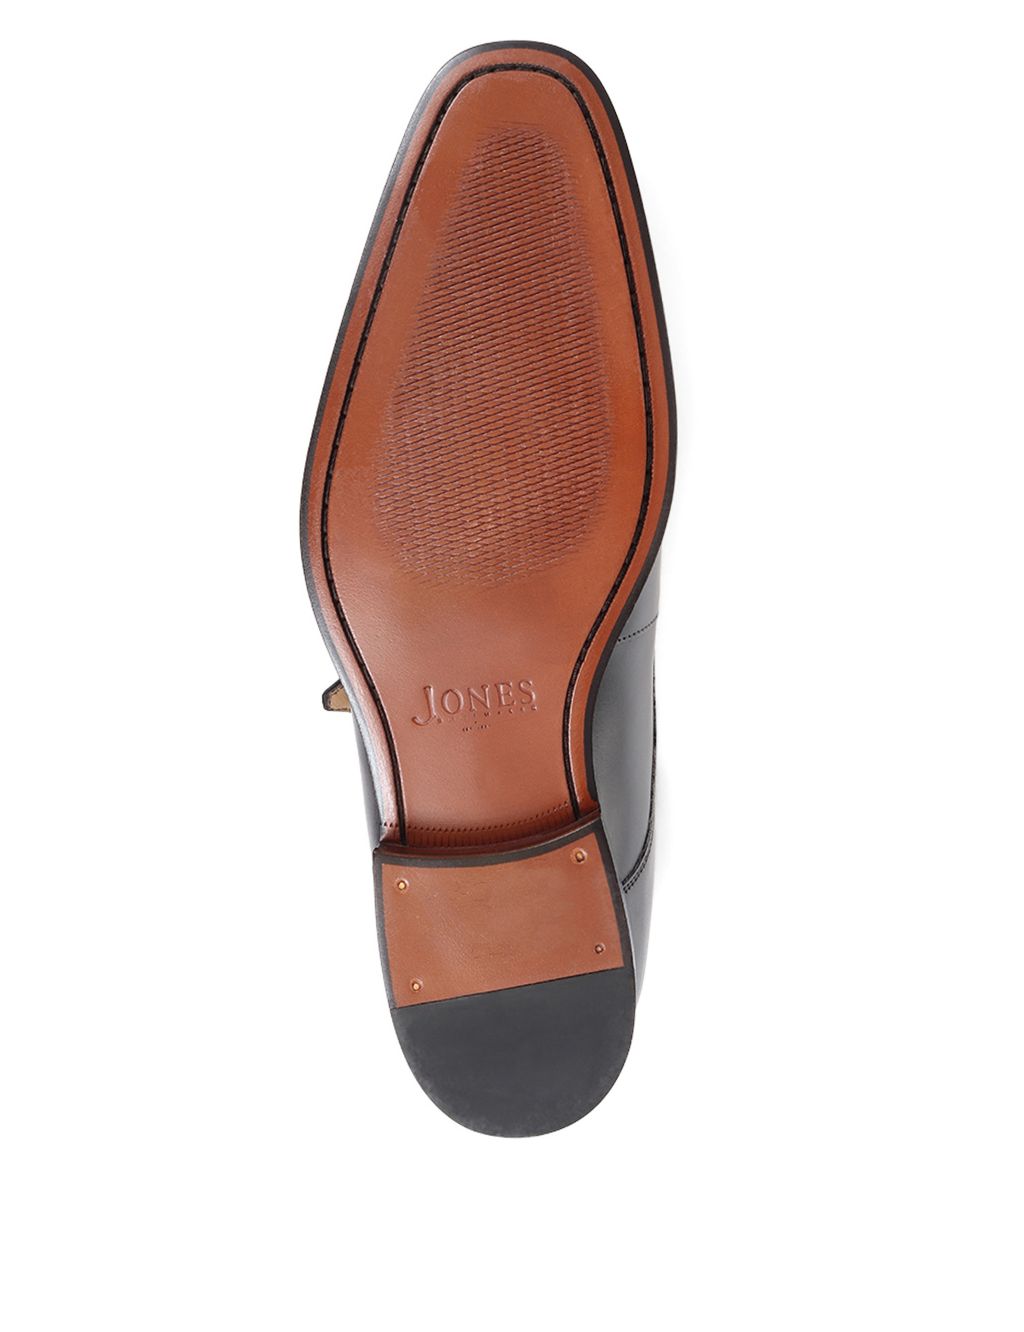 Leather Monk Strap Shoes image 4